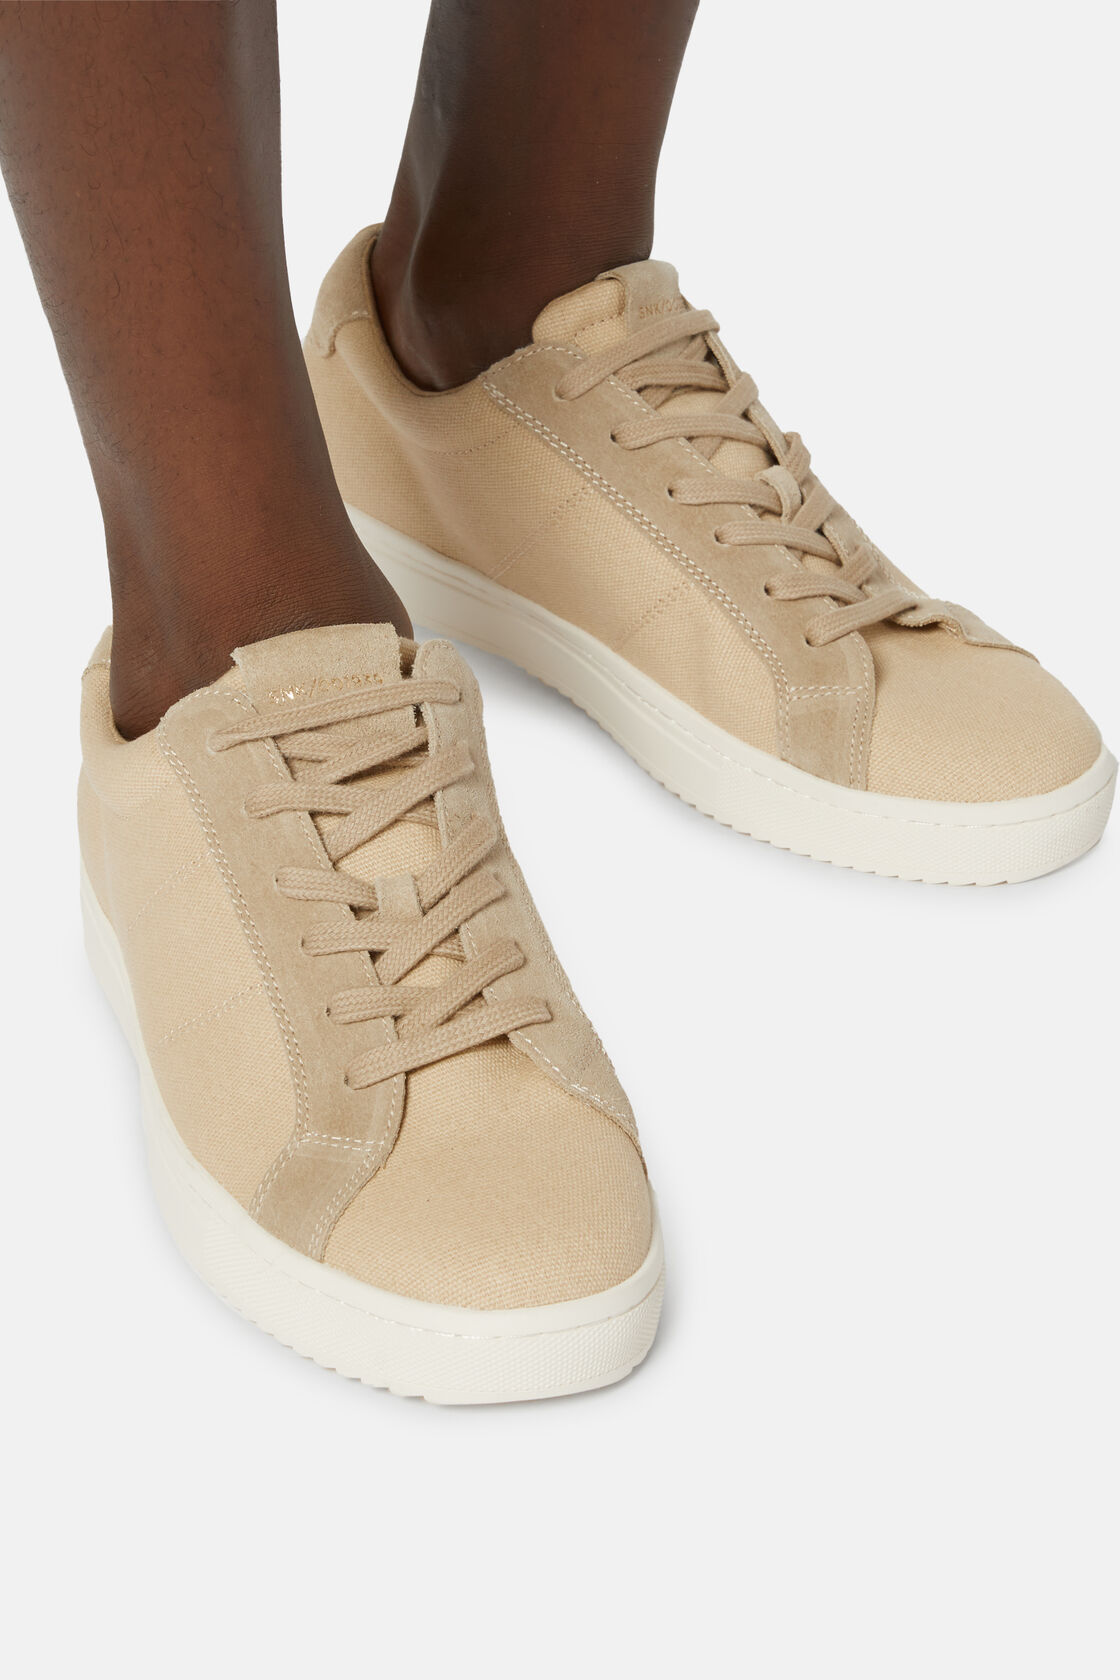 Beige Canvas and Suede Trainers, Beige, hi-res